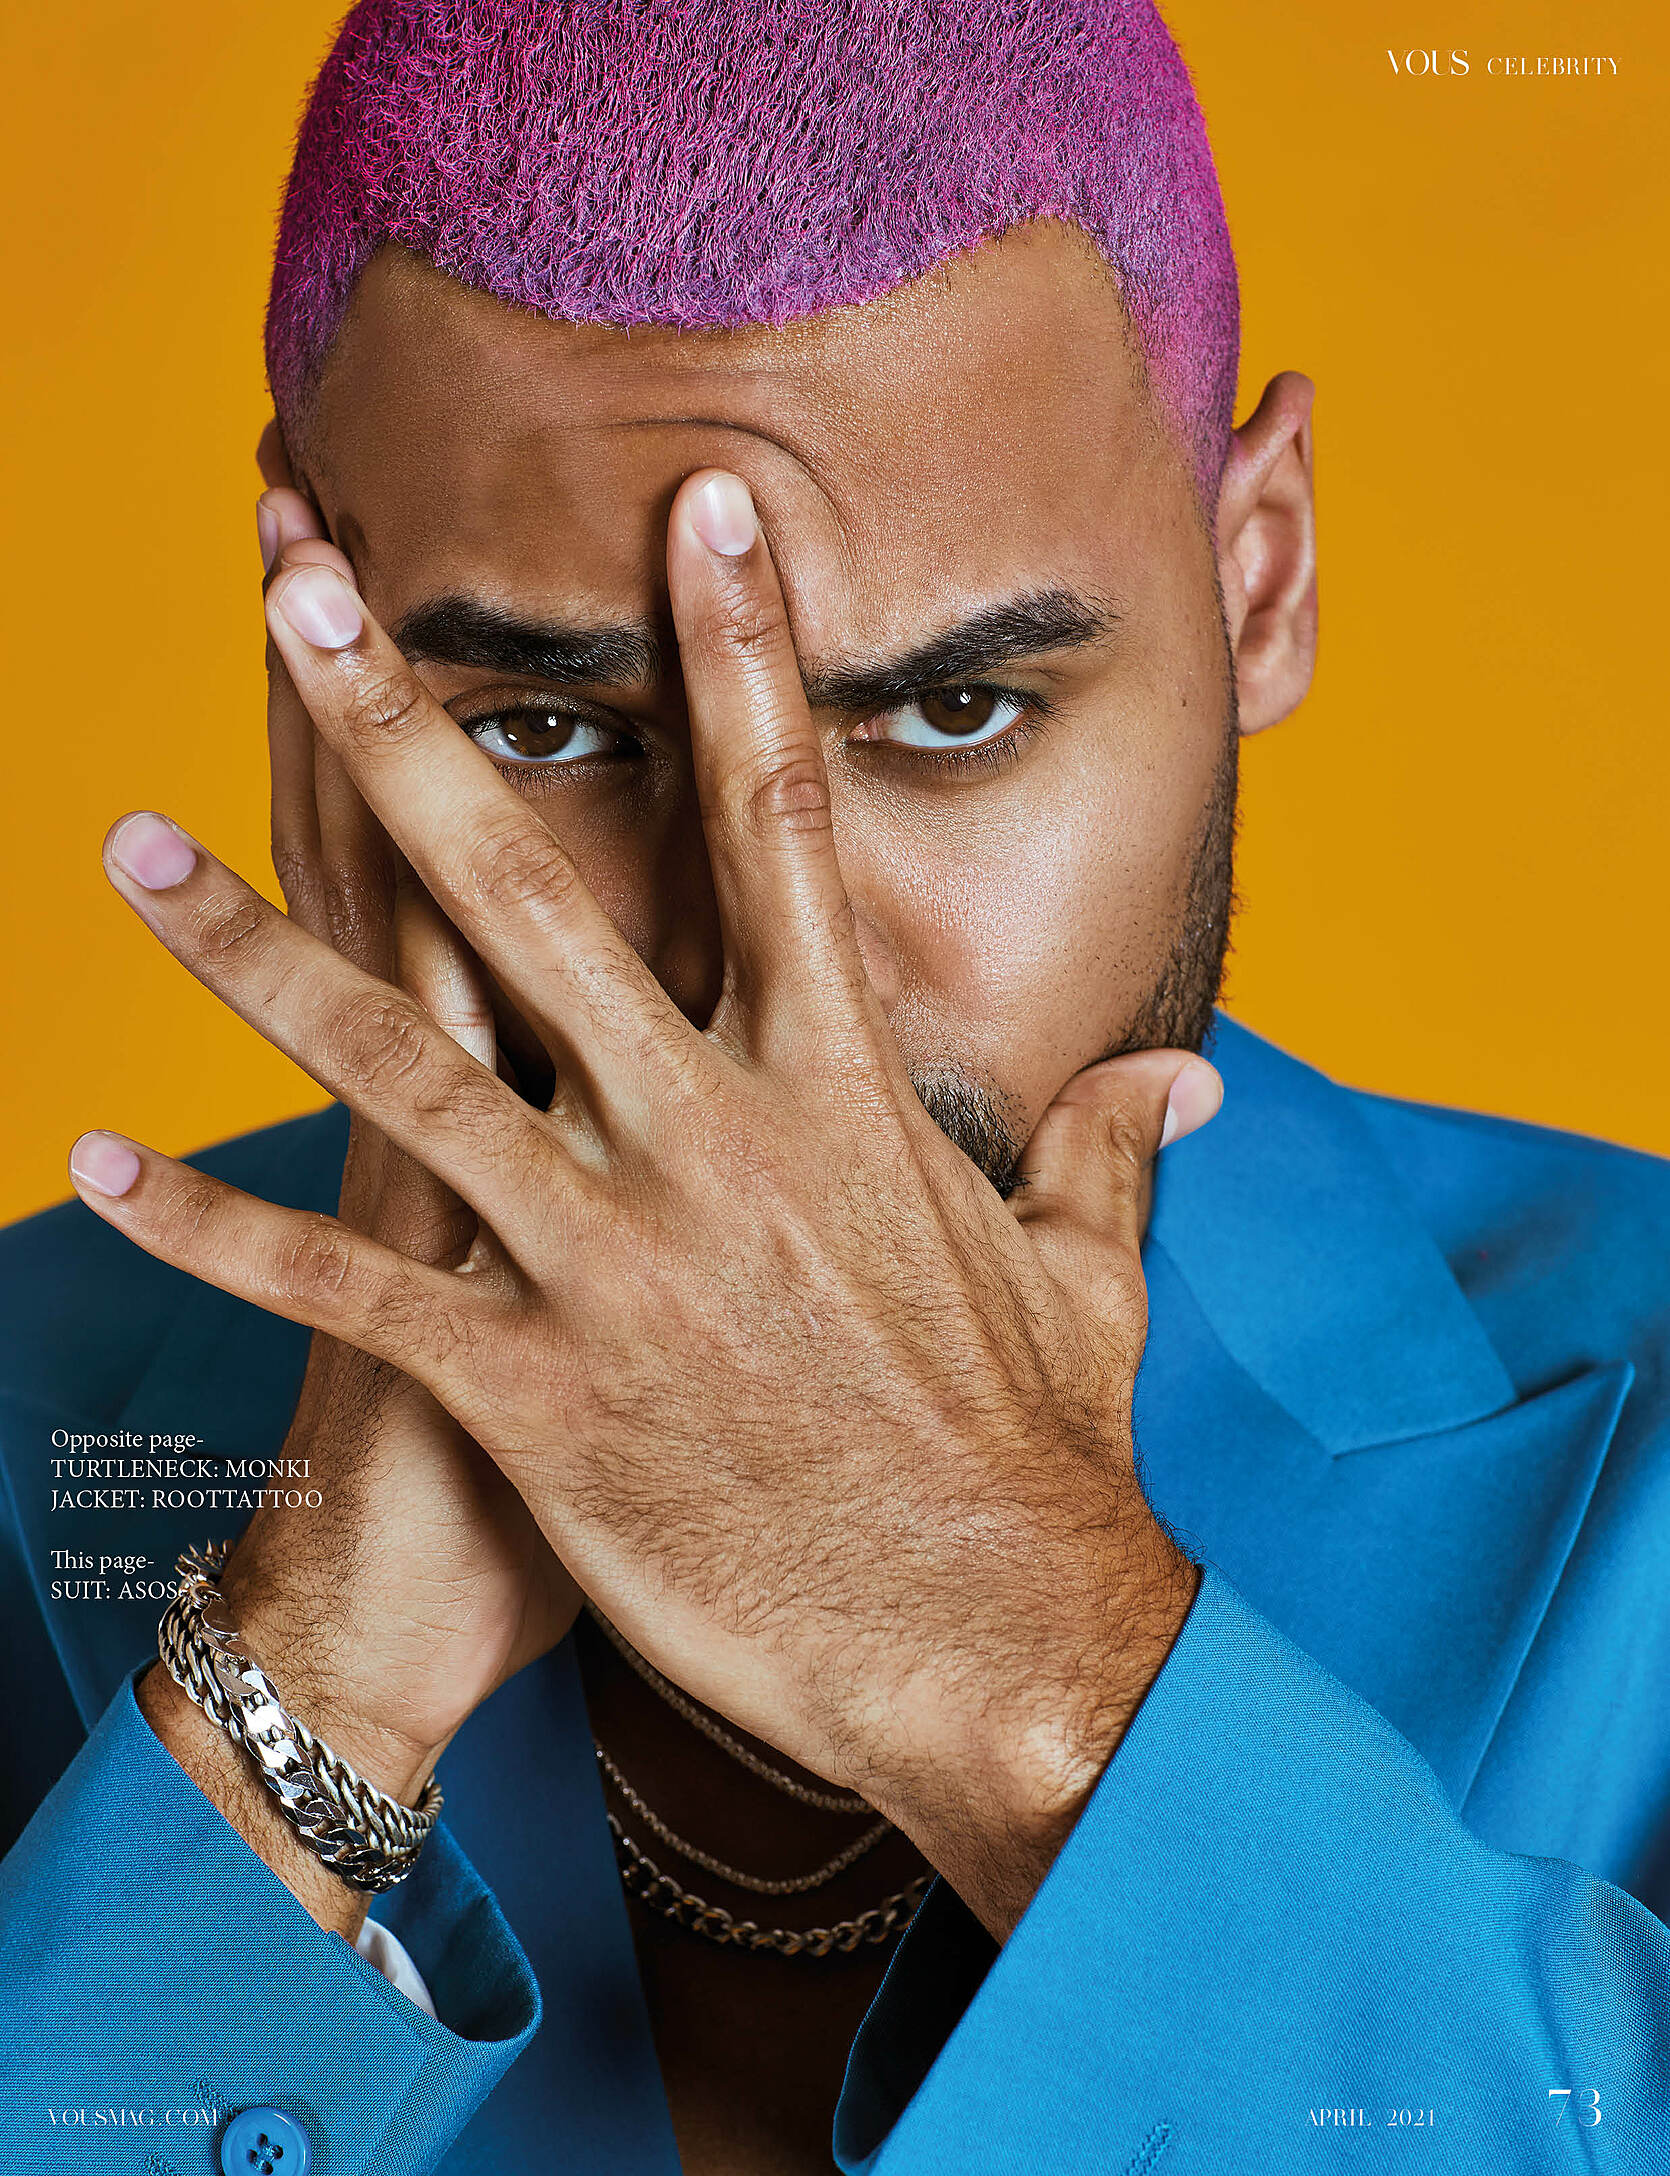 A male model with a blue suit and pink hair